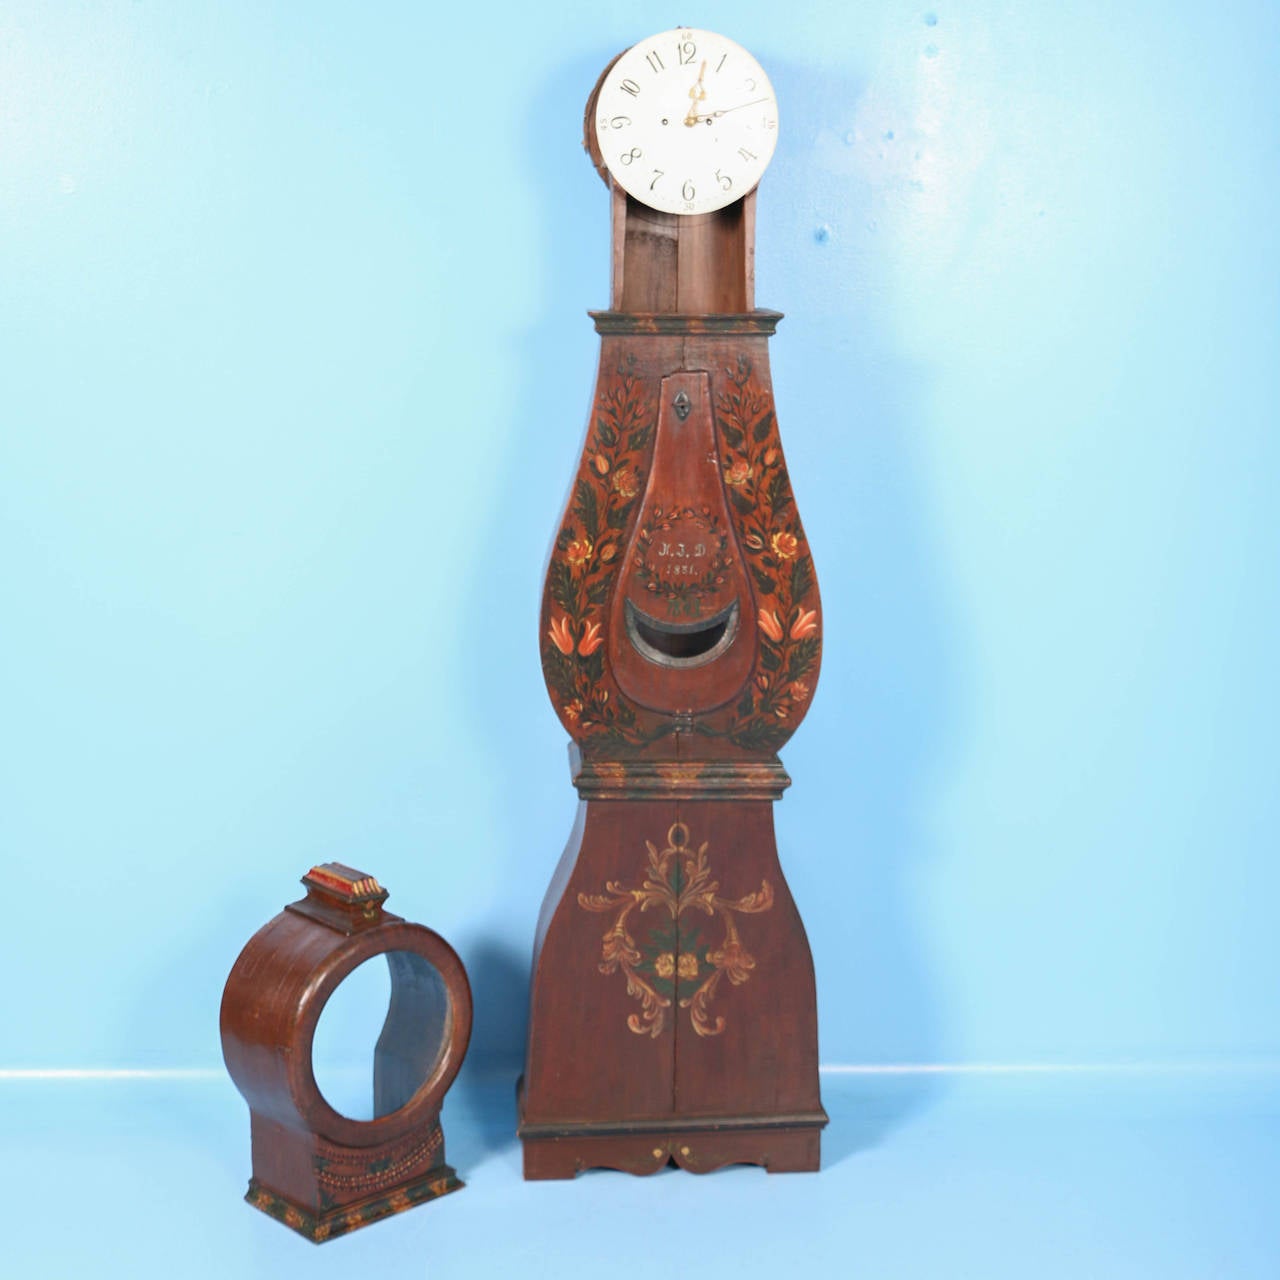 The beautiful paint is all original on this grandfather clock from the famous area of Mora, Sweden. It was painted brown with floral embellishments all around in the traditional Folk Art style of the mid-1800s. The monogram of K.J.D. and date of